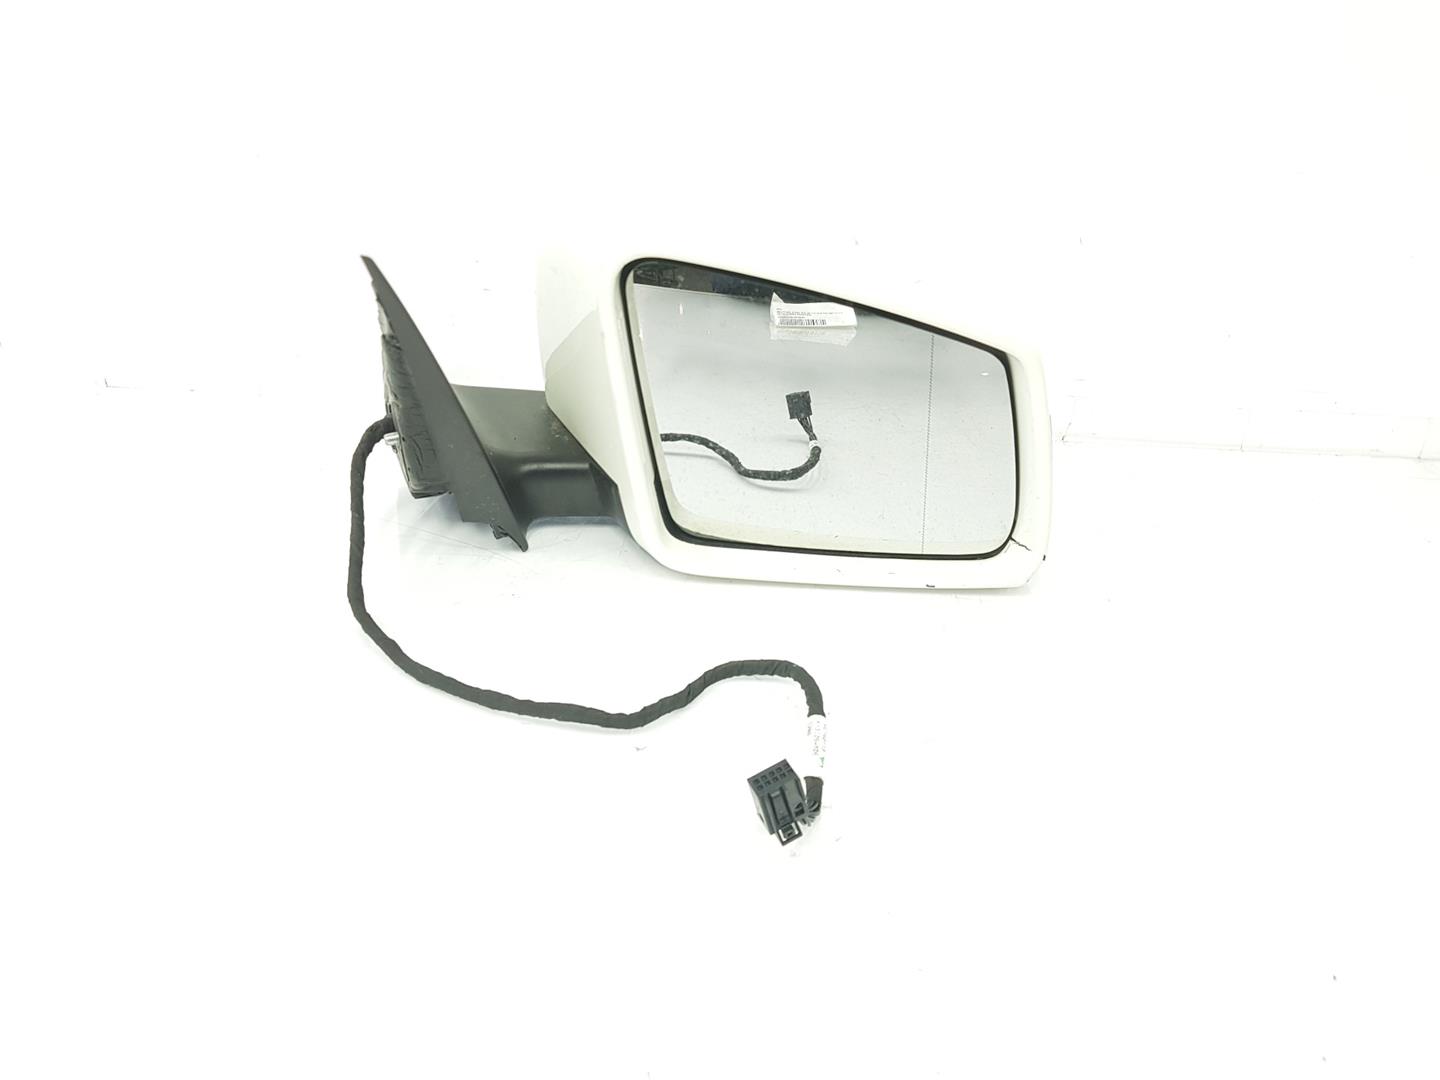 MERCEDES-BENZ CLA-Class C117 (2013-2016) Right Side Wing Mirror A1178100876, A1178100876, COLORBLANCO650 19793839